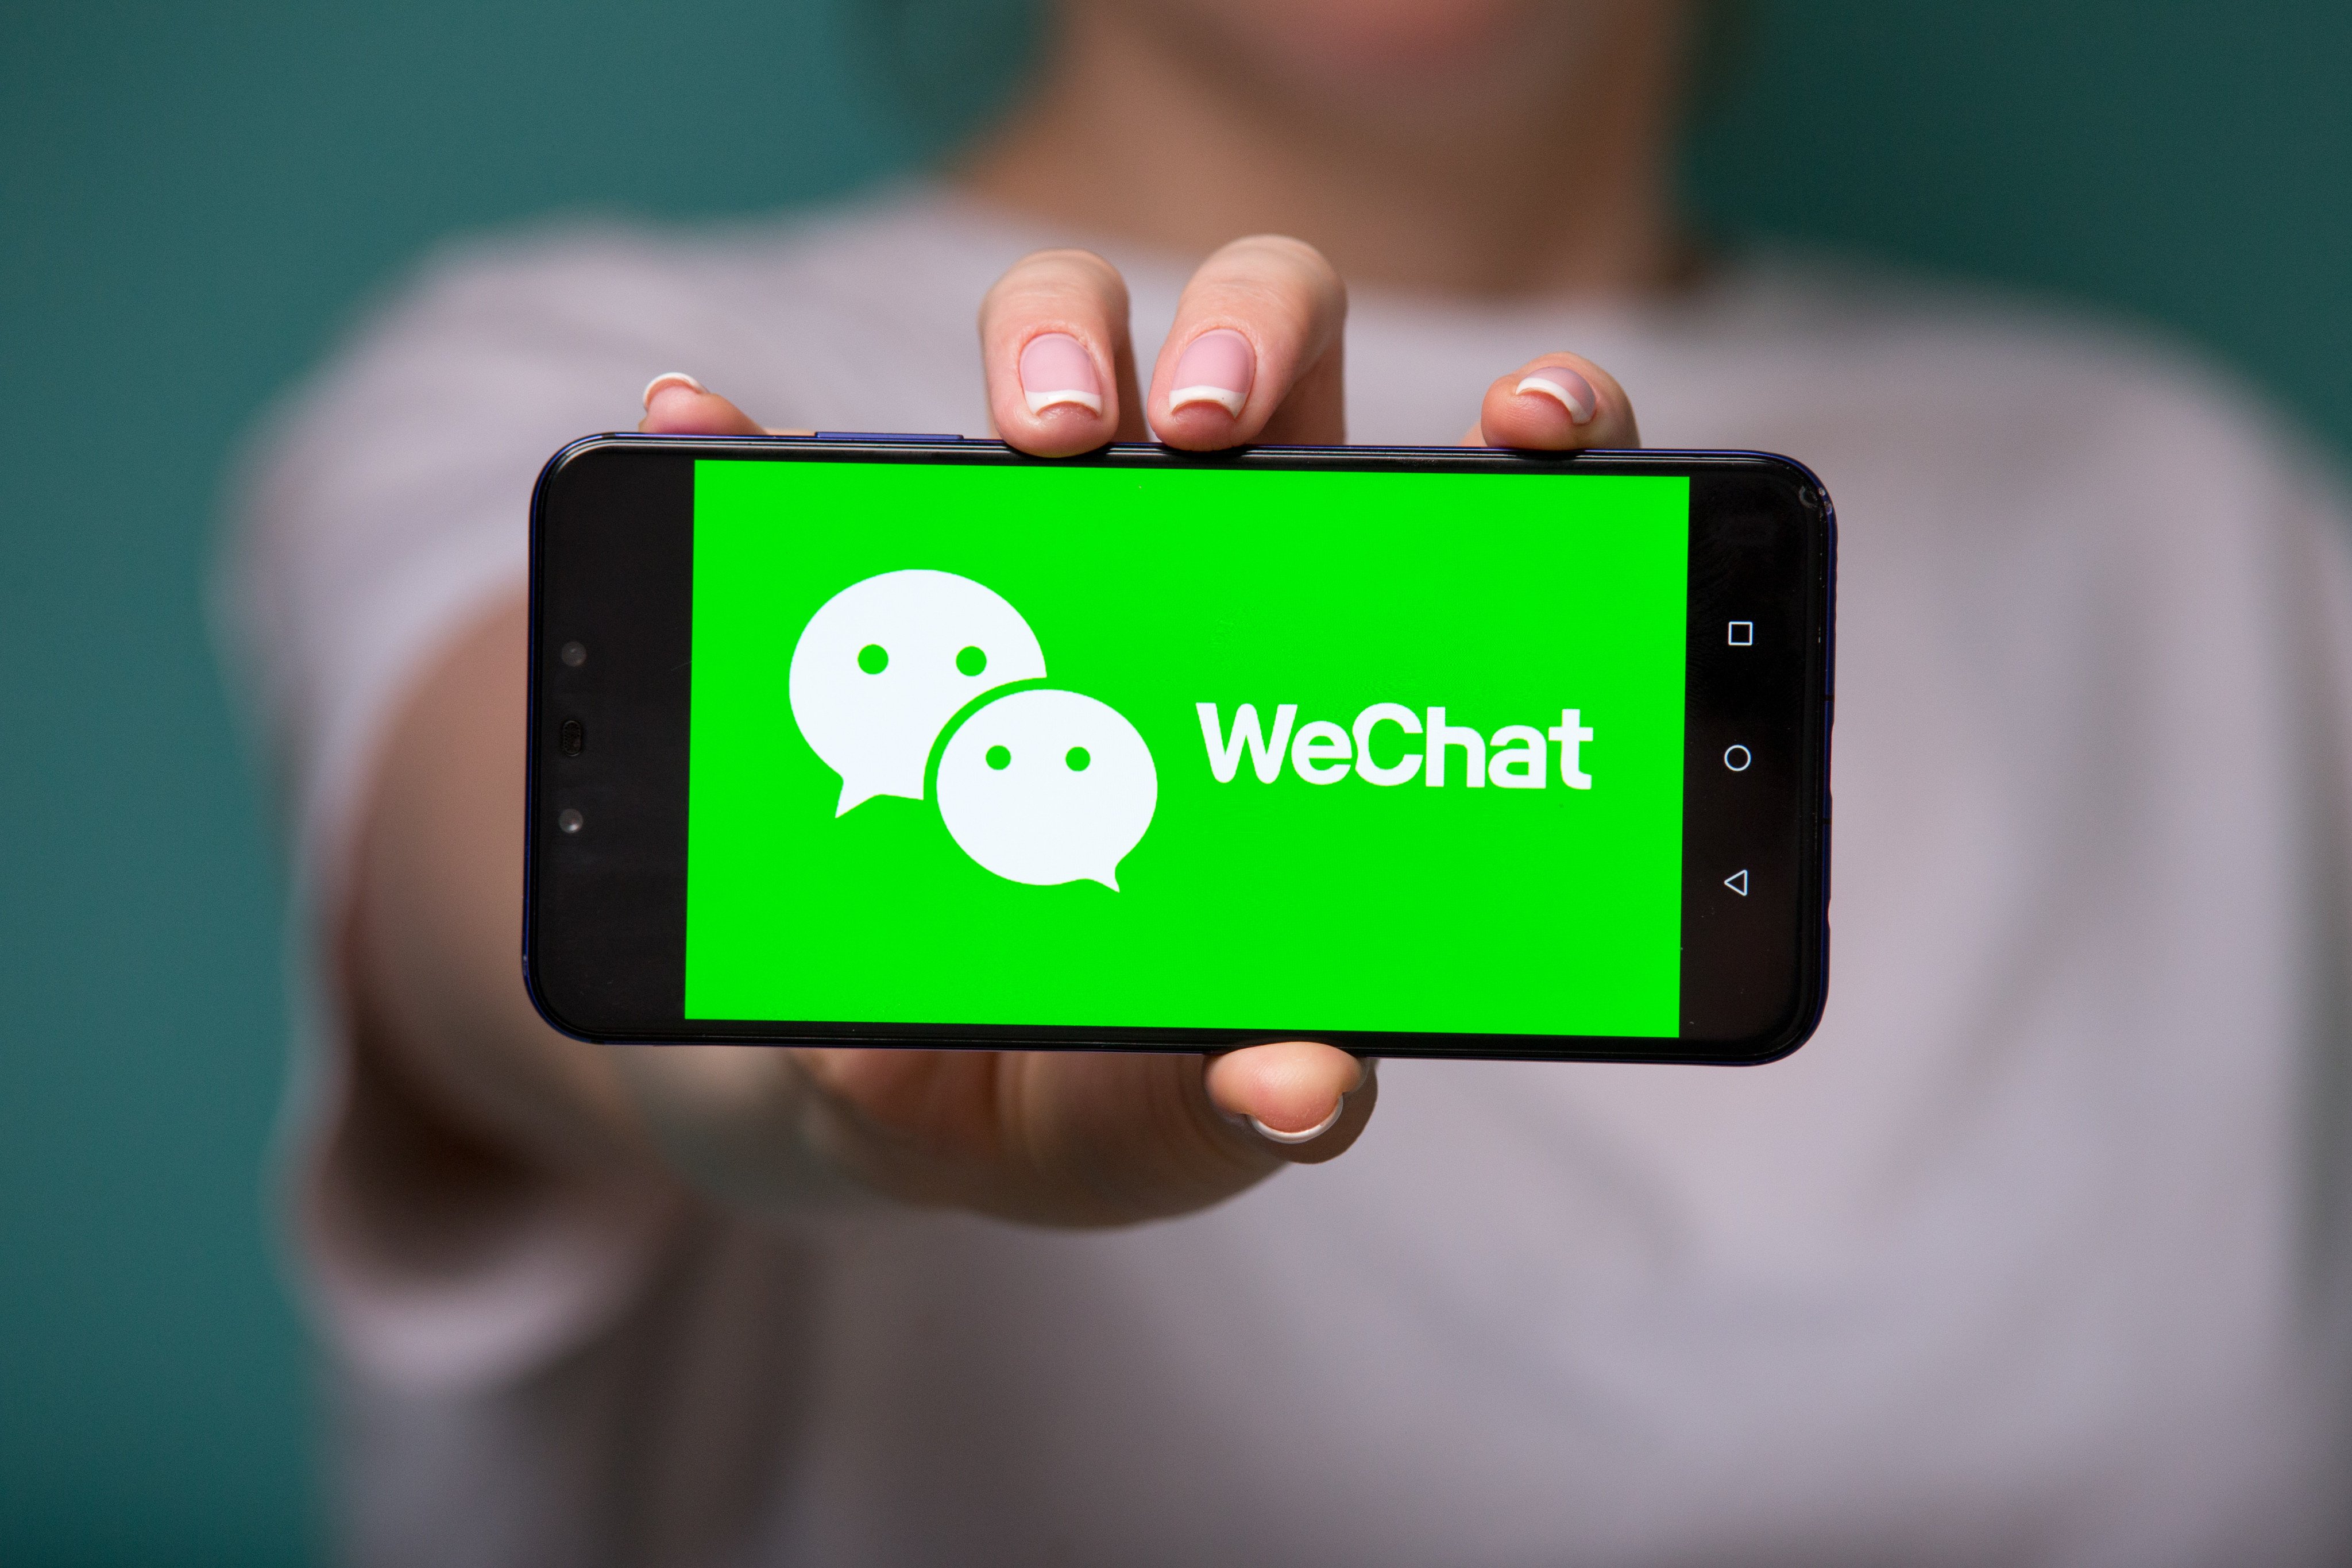 Ma described the WeChat issue as “a misunderstanding caused by cache acceleration of images”. Photo: Shutterstock 